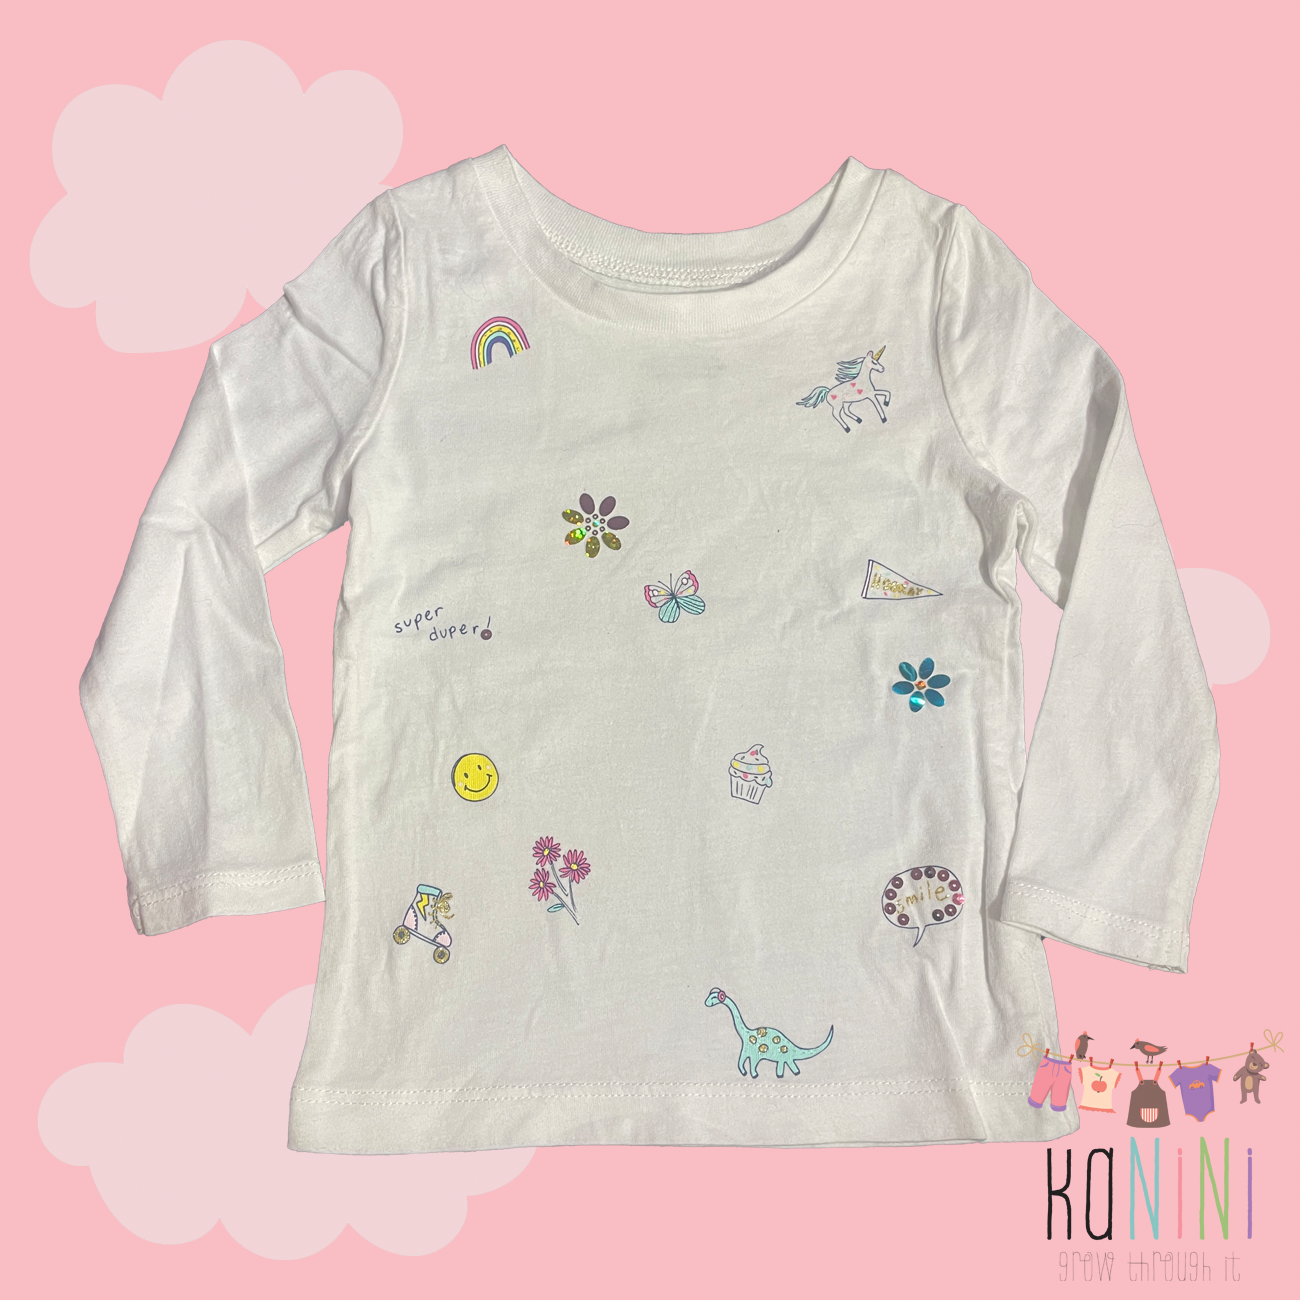 Featured image for “Carter's 12 Months Girls Long Sleeve TShirt”